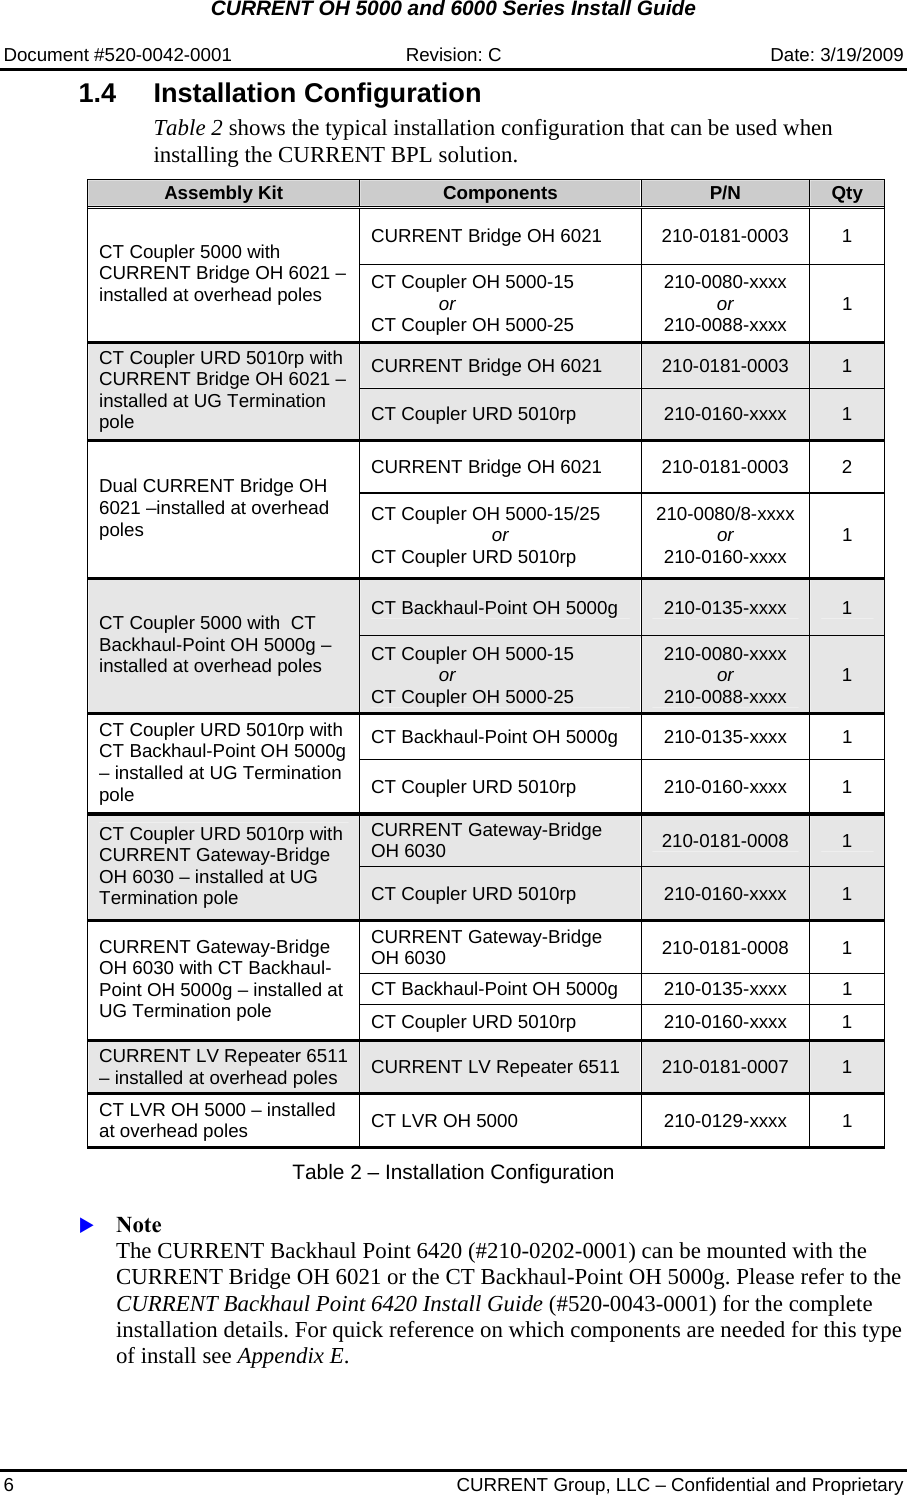 CURRENT OH 5000 and 6000 Series Install Guide  Document #520-0042-0001  Revision: C  Date: 3/19/2009 6  CURRENT Group, LLC – Confidential and Proprietary 1.4 Installation Configuration Table 2 shows the typical installation configuration that can be used when installing the CURRENT BPL solution.    Assembly Kit  Components  P/N  Qty CURRENT Bridge OH 6021  210-0181-0003  1 CT Coupler 5000 with  CURRENT Bridge OH 6021 – installed at overhead poles  CT Coupler OH 5000-15              or  CT Coupler OH 5000-25 210-0080-xxxx or 210-0088-xxxx  1 CURRENT Bridge OH 6021  210-0181-0003  1 CT Coupler URD 5010rp with CURRENT Bridge OH 6021 – installed at UG Termination pole  CT Coupler URD 5010rp  210-0160-xxxx  1 CURRENT Bridge OH 6021  210-0181-0003  2 Dual CURRENT Bridge OH 6021 –installed at overhead poles  CT Coupler OH 5000-15/25 or CT Coupler URD 5010rp 210-0080/8-xxxx or 210-0160-xxxx  1 CT Backhaul-Point OH 5000g  210-0135-xxxx  1 CT Coupler 5000 with  CT Backhaul-Point OH 5000g – installed at overhead poles  CT Coupler OH 5000-15              or  CT Coupler OH 5000-25 210-0080-xxxx or 210-0088-xxxx  1 CT Backhaul-Point OH 5000g  210-0135-xxxx  1 CT Coupler URD 5010rp with CT Backhaul-Point OH 5000g – installed at UG Termination pole  CT Coupler URD 5010rp  210-0160-xxxx  1 CURRENT Gateway-Bridge OH 6030  210-0181-0008  1 CT Coupler URD 5010rp with CURRENT Gateway-Bridge OH 6030 – installed at UG Termination pole  CT Coupler URD 5010rp  210-0160-xxxx  1 CURRENT Gateway-Bridge OH 6030  210-0181-0008 1 CT Backhaul-Point OH 5000g  210-0135-xxxx  1 CURRENT Gateway-Bridge OH 6030 with CT Backhaul-Point OH 5000g – installed at UG Termination pole  CT Coupler URD 5010rp  210-0160-xxxx  1 CURRENT LV Repeater 6511 – installed at overhead poles  CURRENT LV Repeater 6511  210-0181-0007  1 CT LVR OH 5000 – installed at overhead poles  CT LVR OH 5000  210-0129-xxxx  1  Table 2 – Installation Configuration  X Note  The CURRENT Backhaul Point 6420 (#210-0202-0001) can be mounted with the CURRENT Bridge OH 6021 or the CT Backhaul-Point OH 5000g. Please refer to the CURRENT Backhaul Point 6420 Install Guide (#520-0043-0001) for the complete installation details. For quick reference on which components are needed for this type of install see Appendix E.   